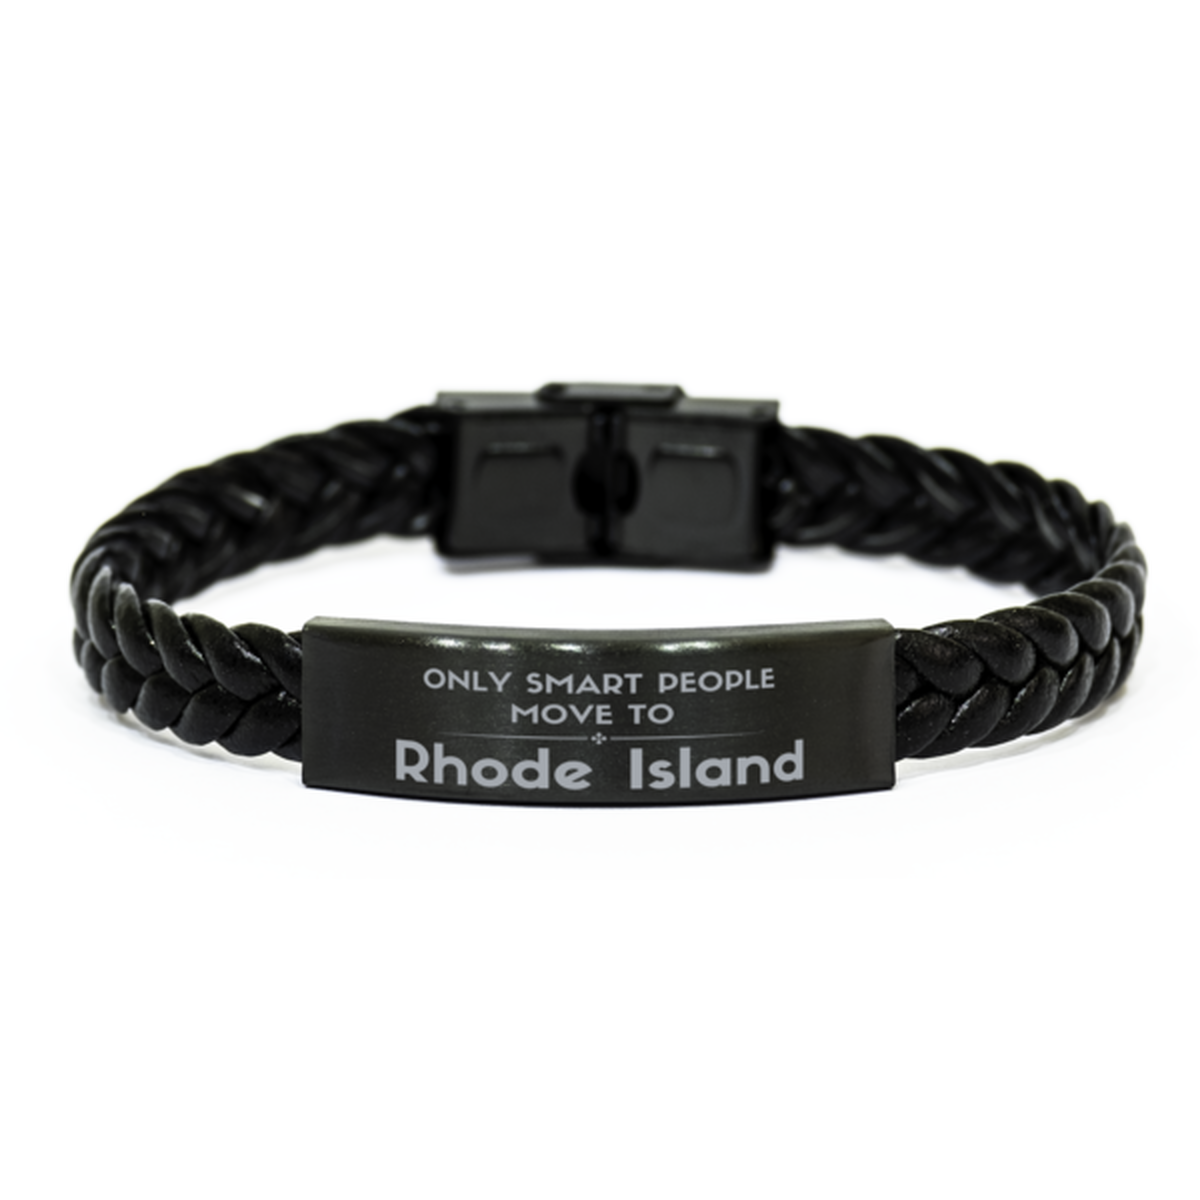 Only smart people move to Rhode Island Braided Leather Bracelet, Gag Gifts For Rhode Island, Move to Rhode Island Gifts for Friends Coworker Funny Saying Quote